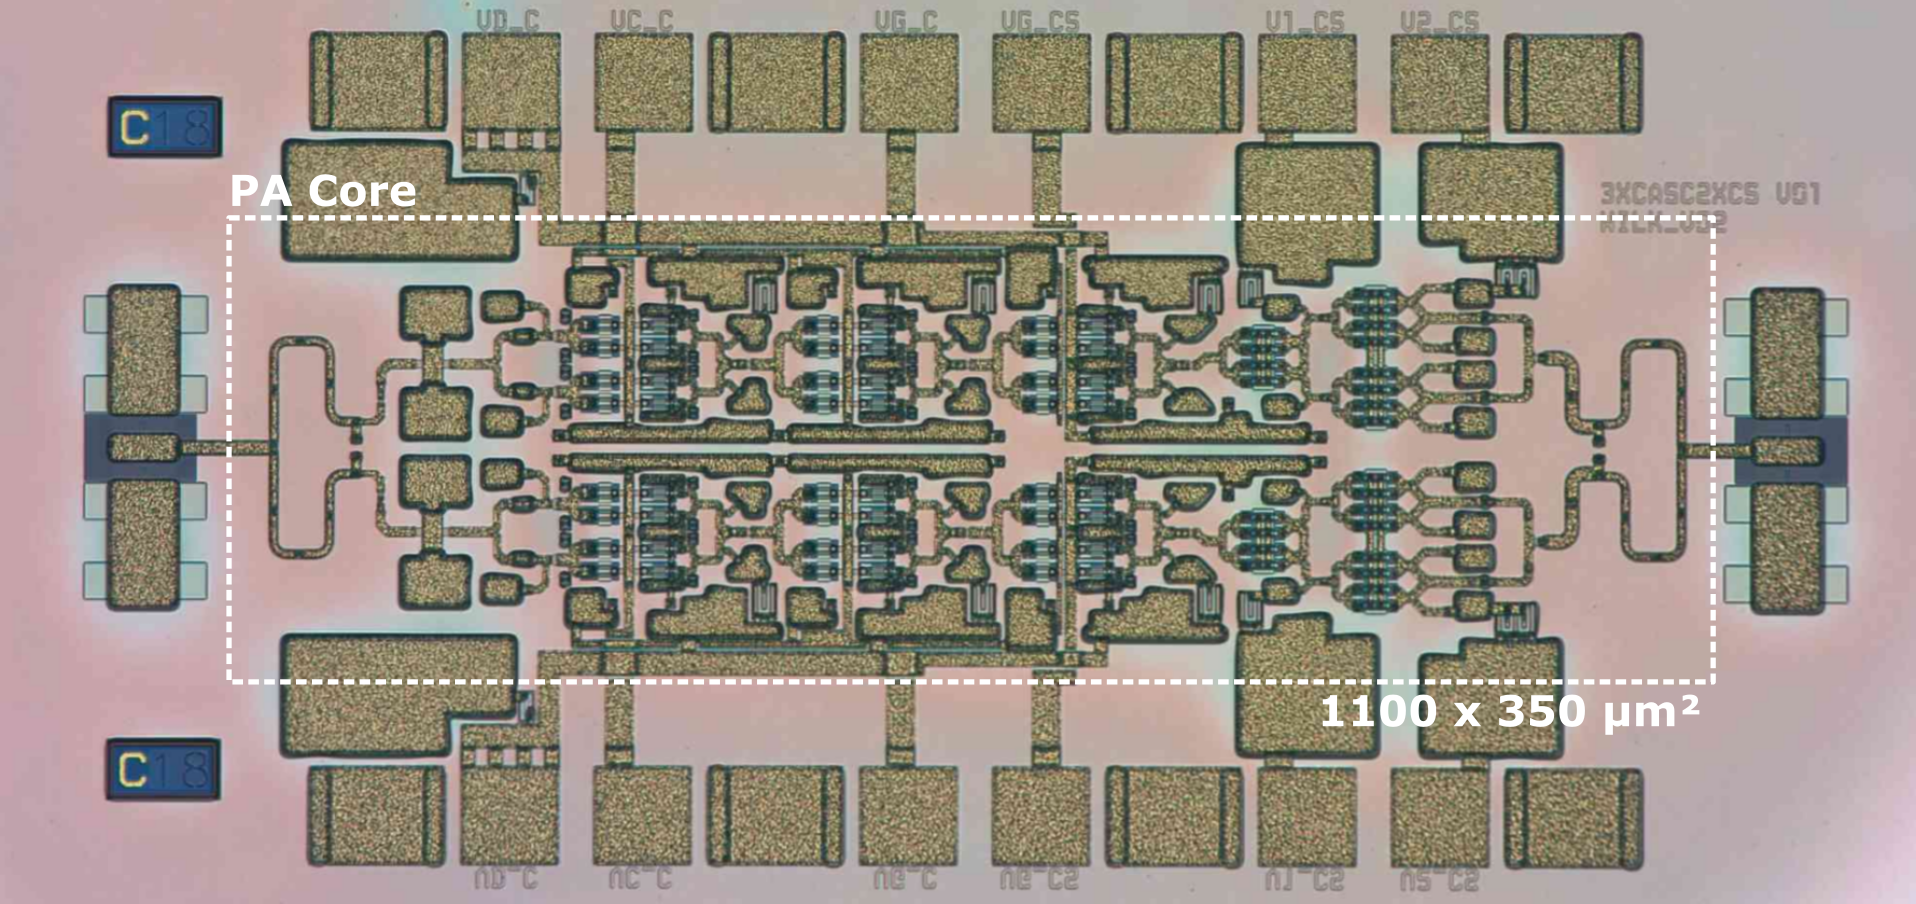 Chip photograph of a 300-GHz power amplifier circuit with more than 20 mW of saturated output power